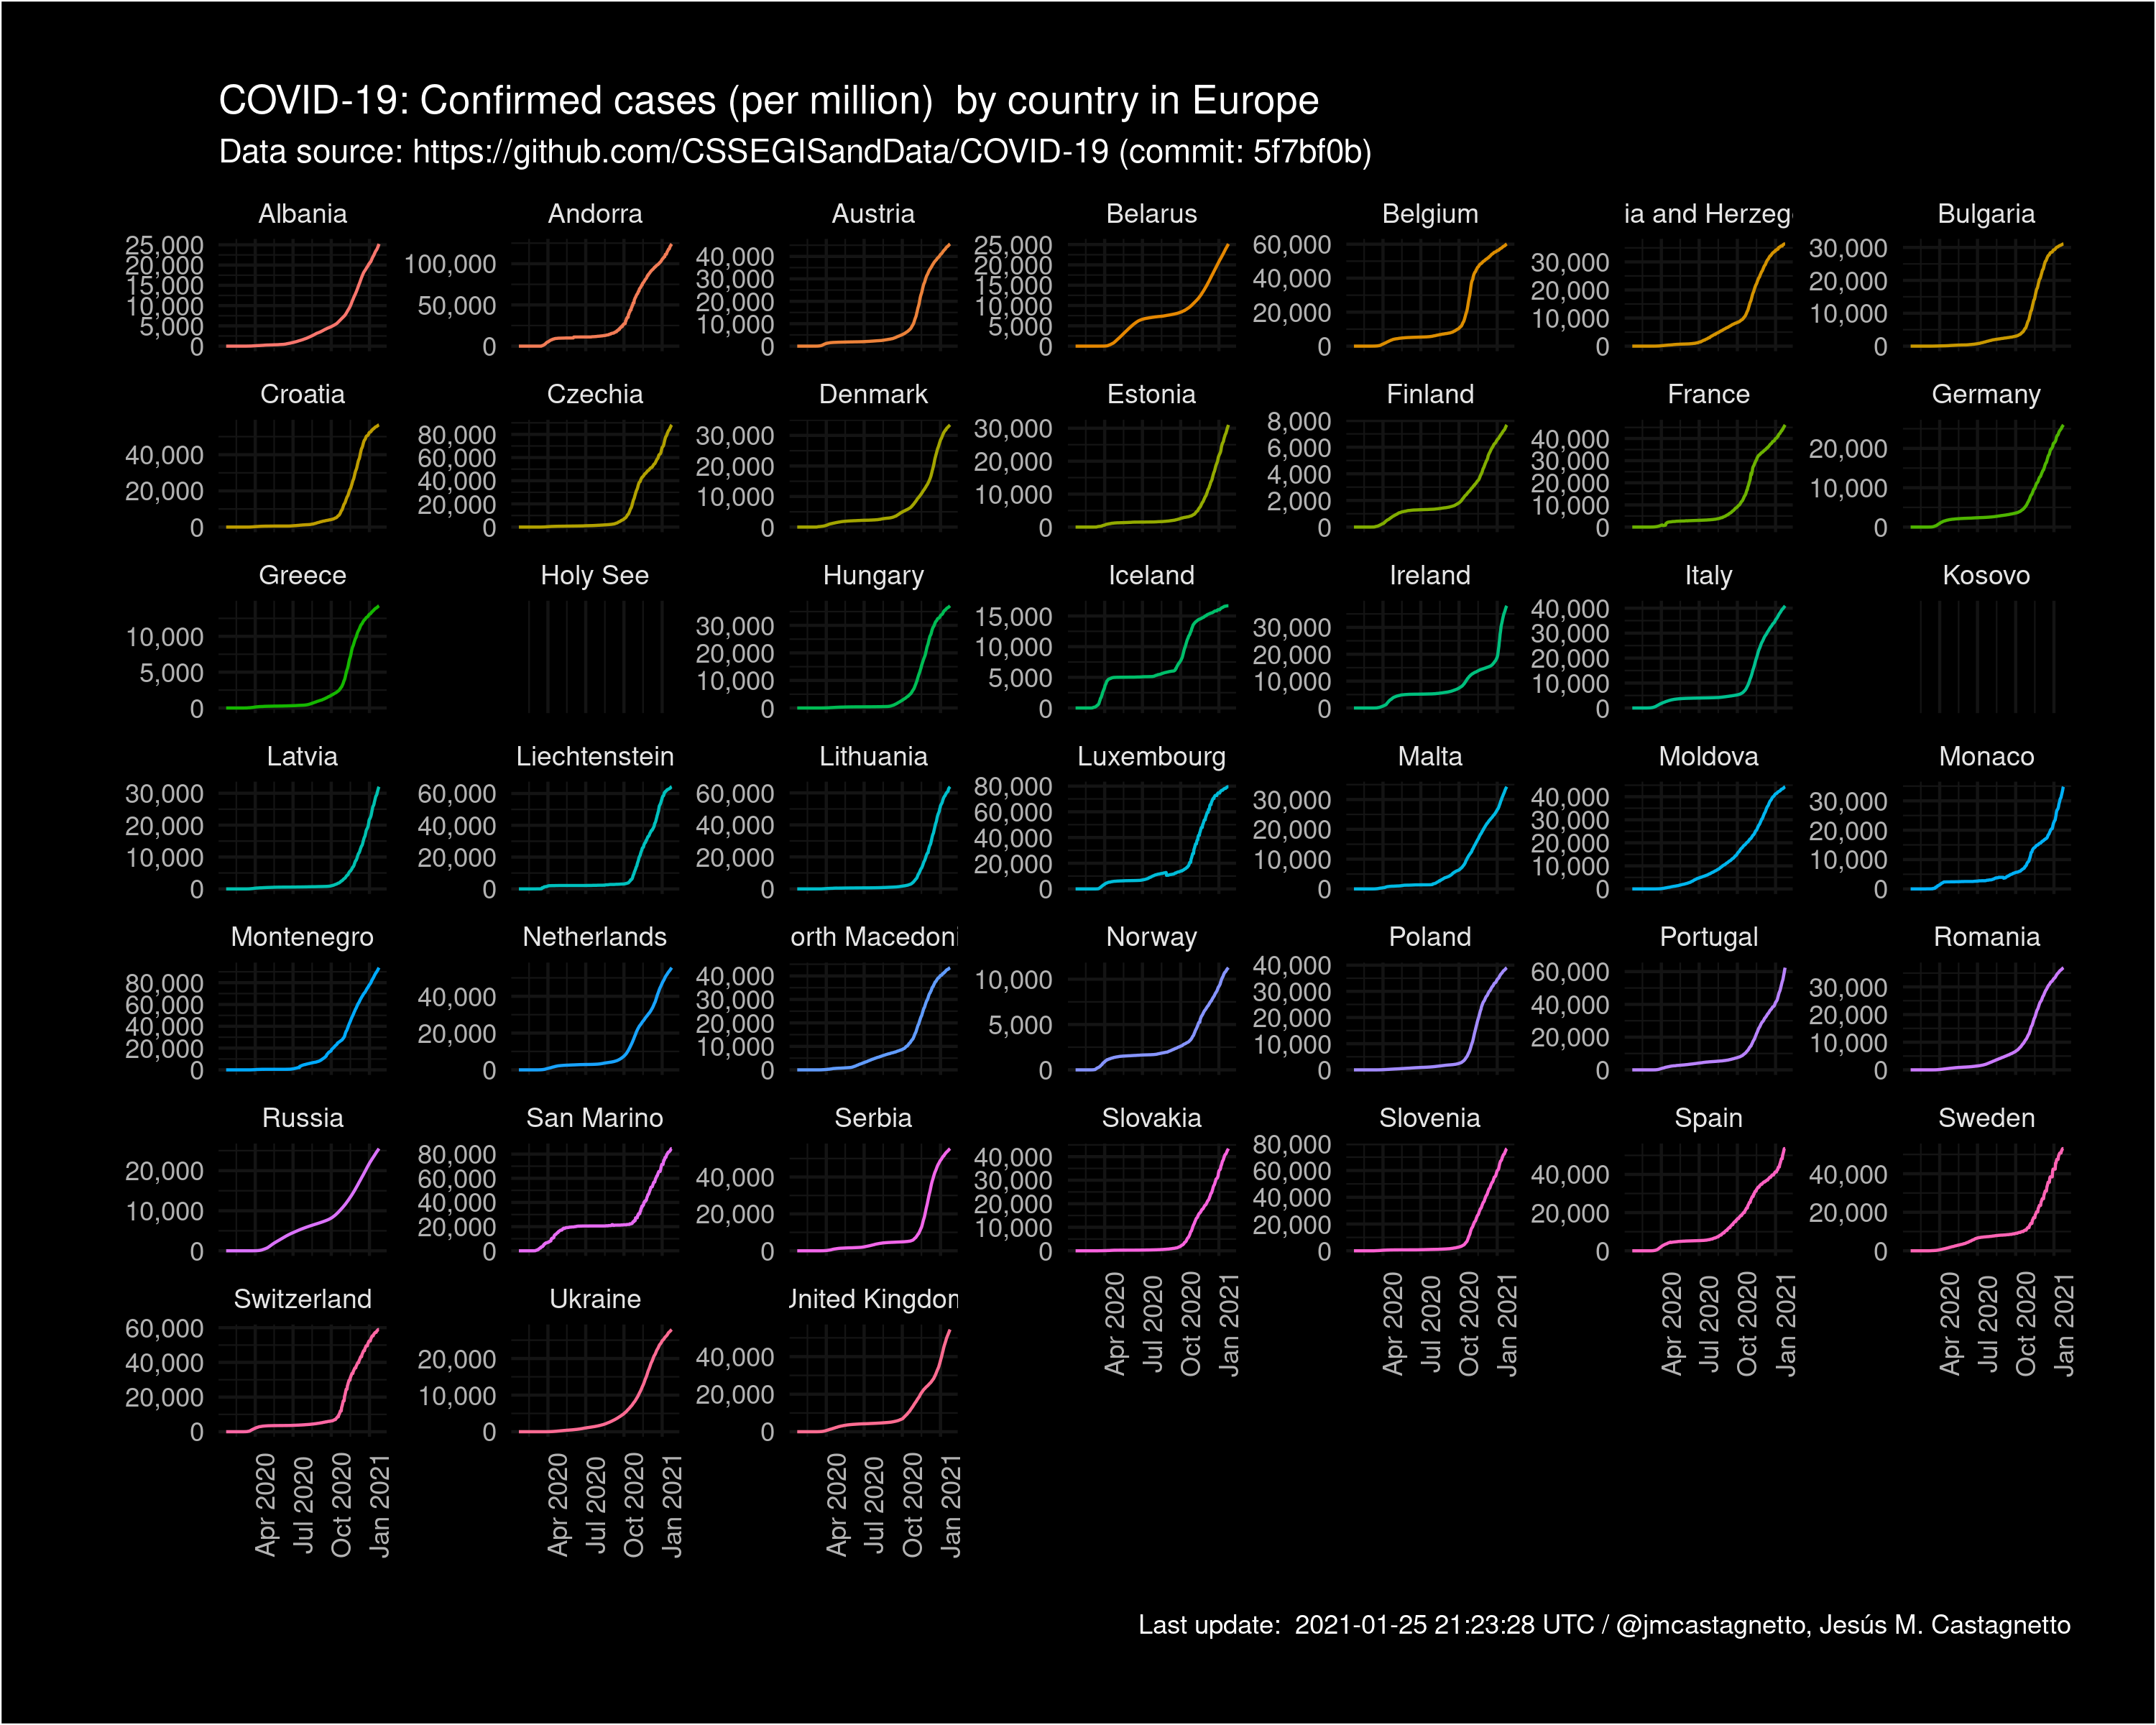 COVID-19 Confirmed cases by country per million (Europe)